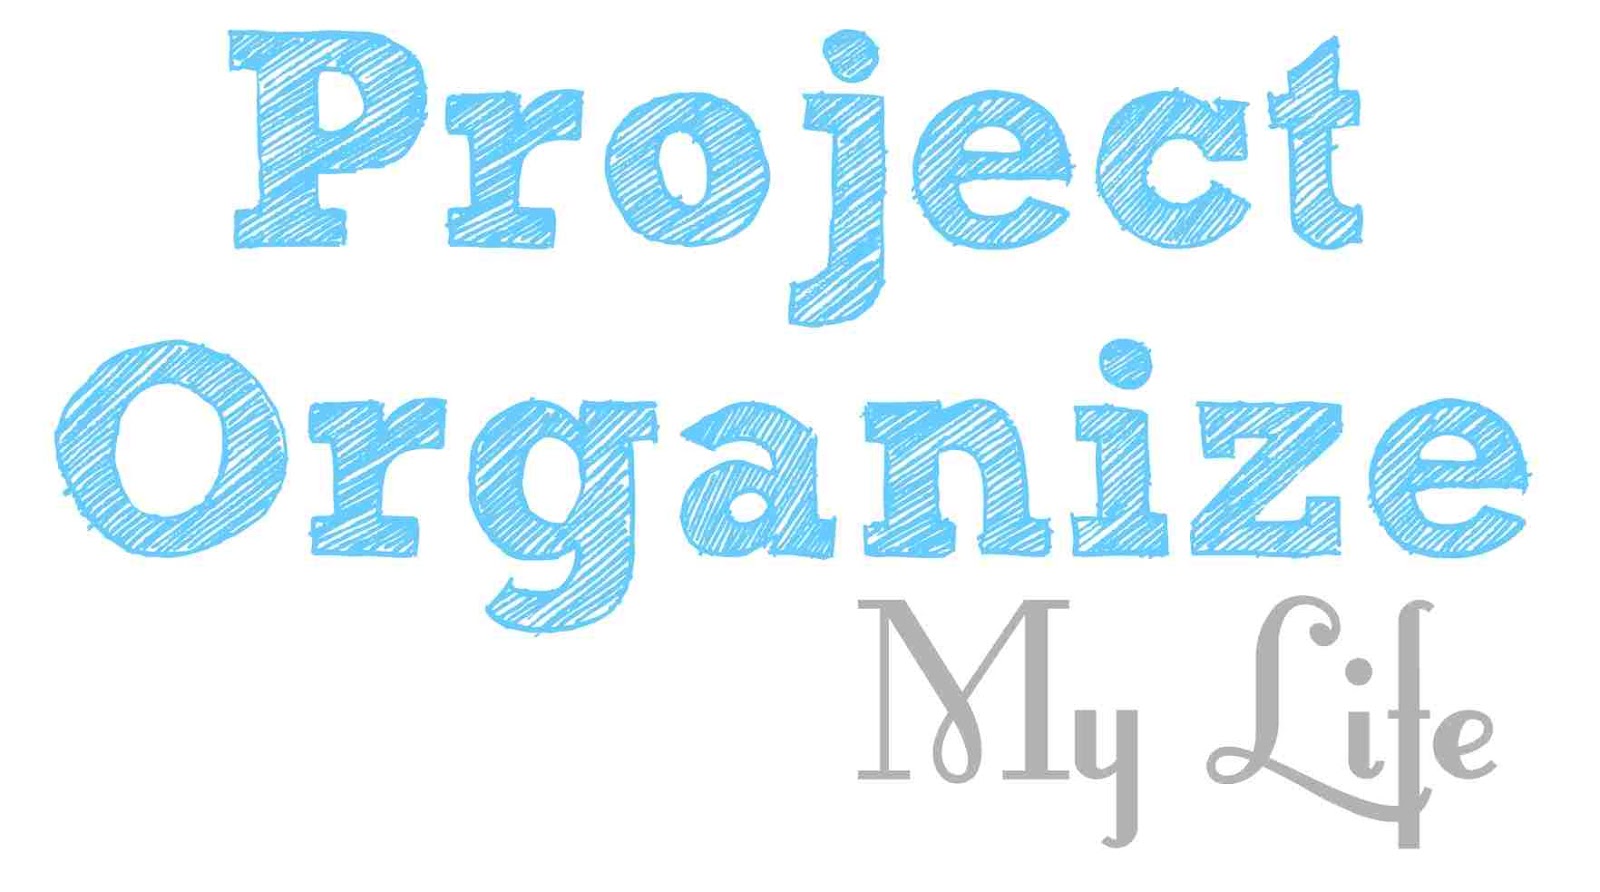 WANT TO GET ORGANIZED? Try Using These Products I Found at